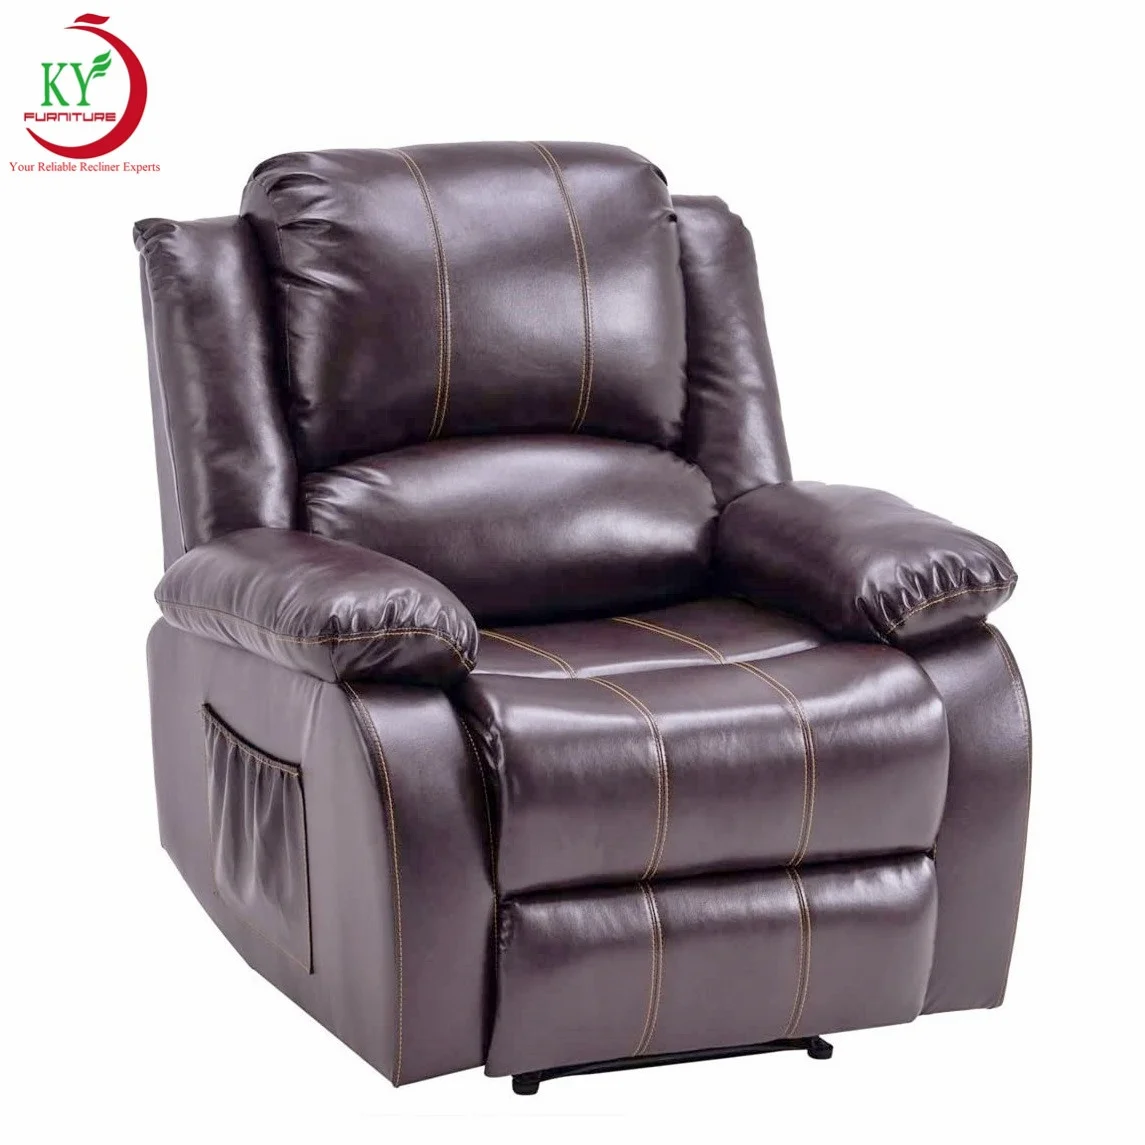 

JKY Furniture Modern Design Sectional Leather Manual Push Back Recliner Sofa Reclinable Chair For Living Room With Massage